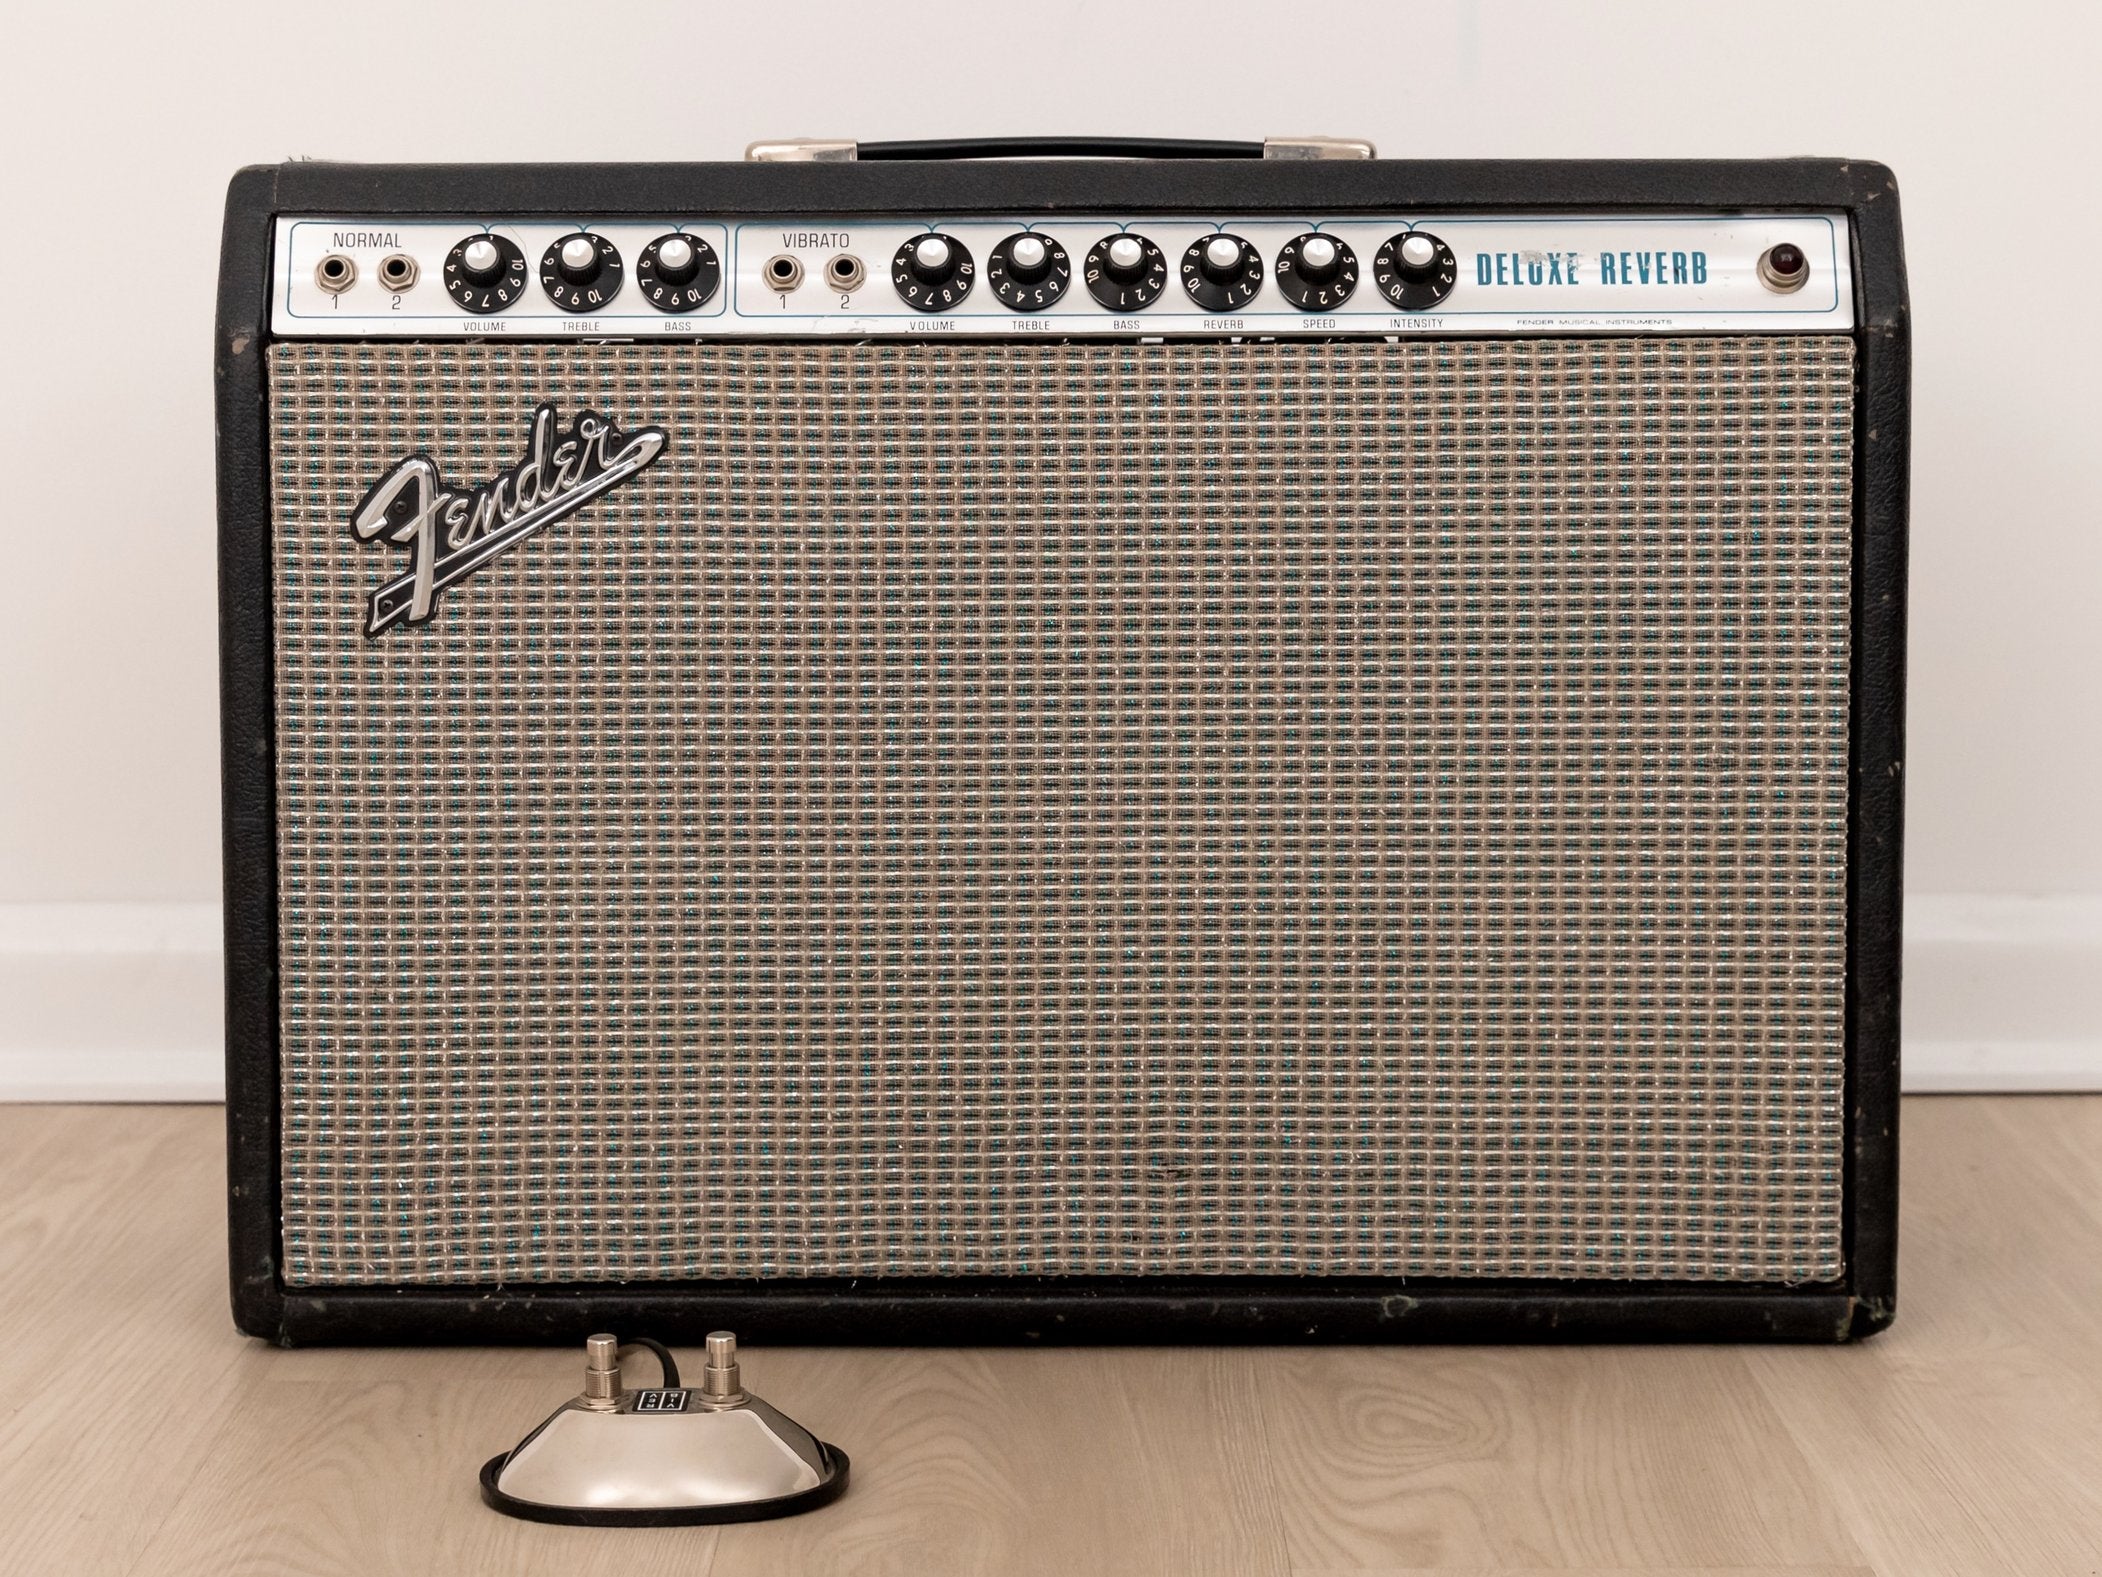 1972 Fender Deluxe Reverb Vintage Silverface Tube Amp 100% Original w/ Ftsw, Cover